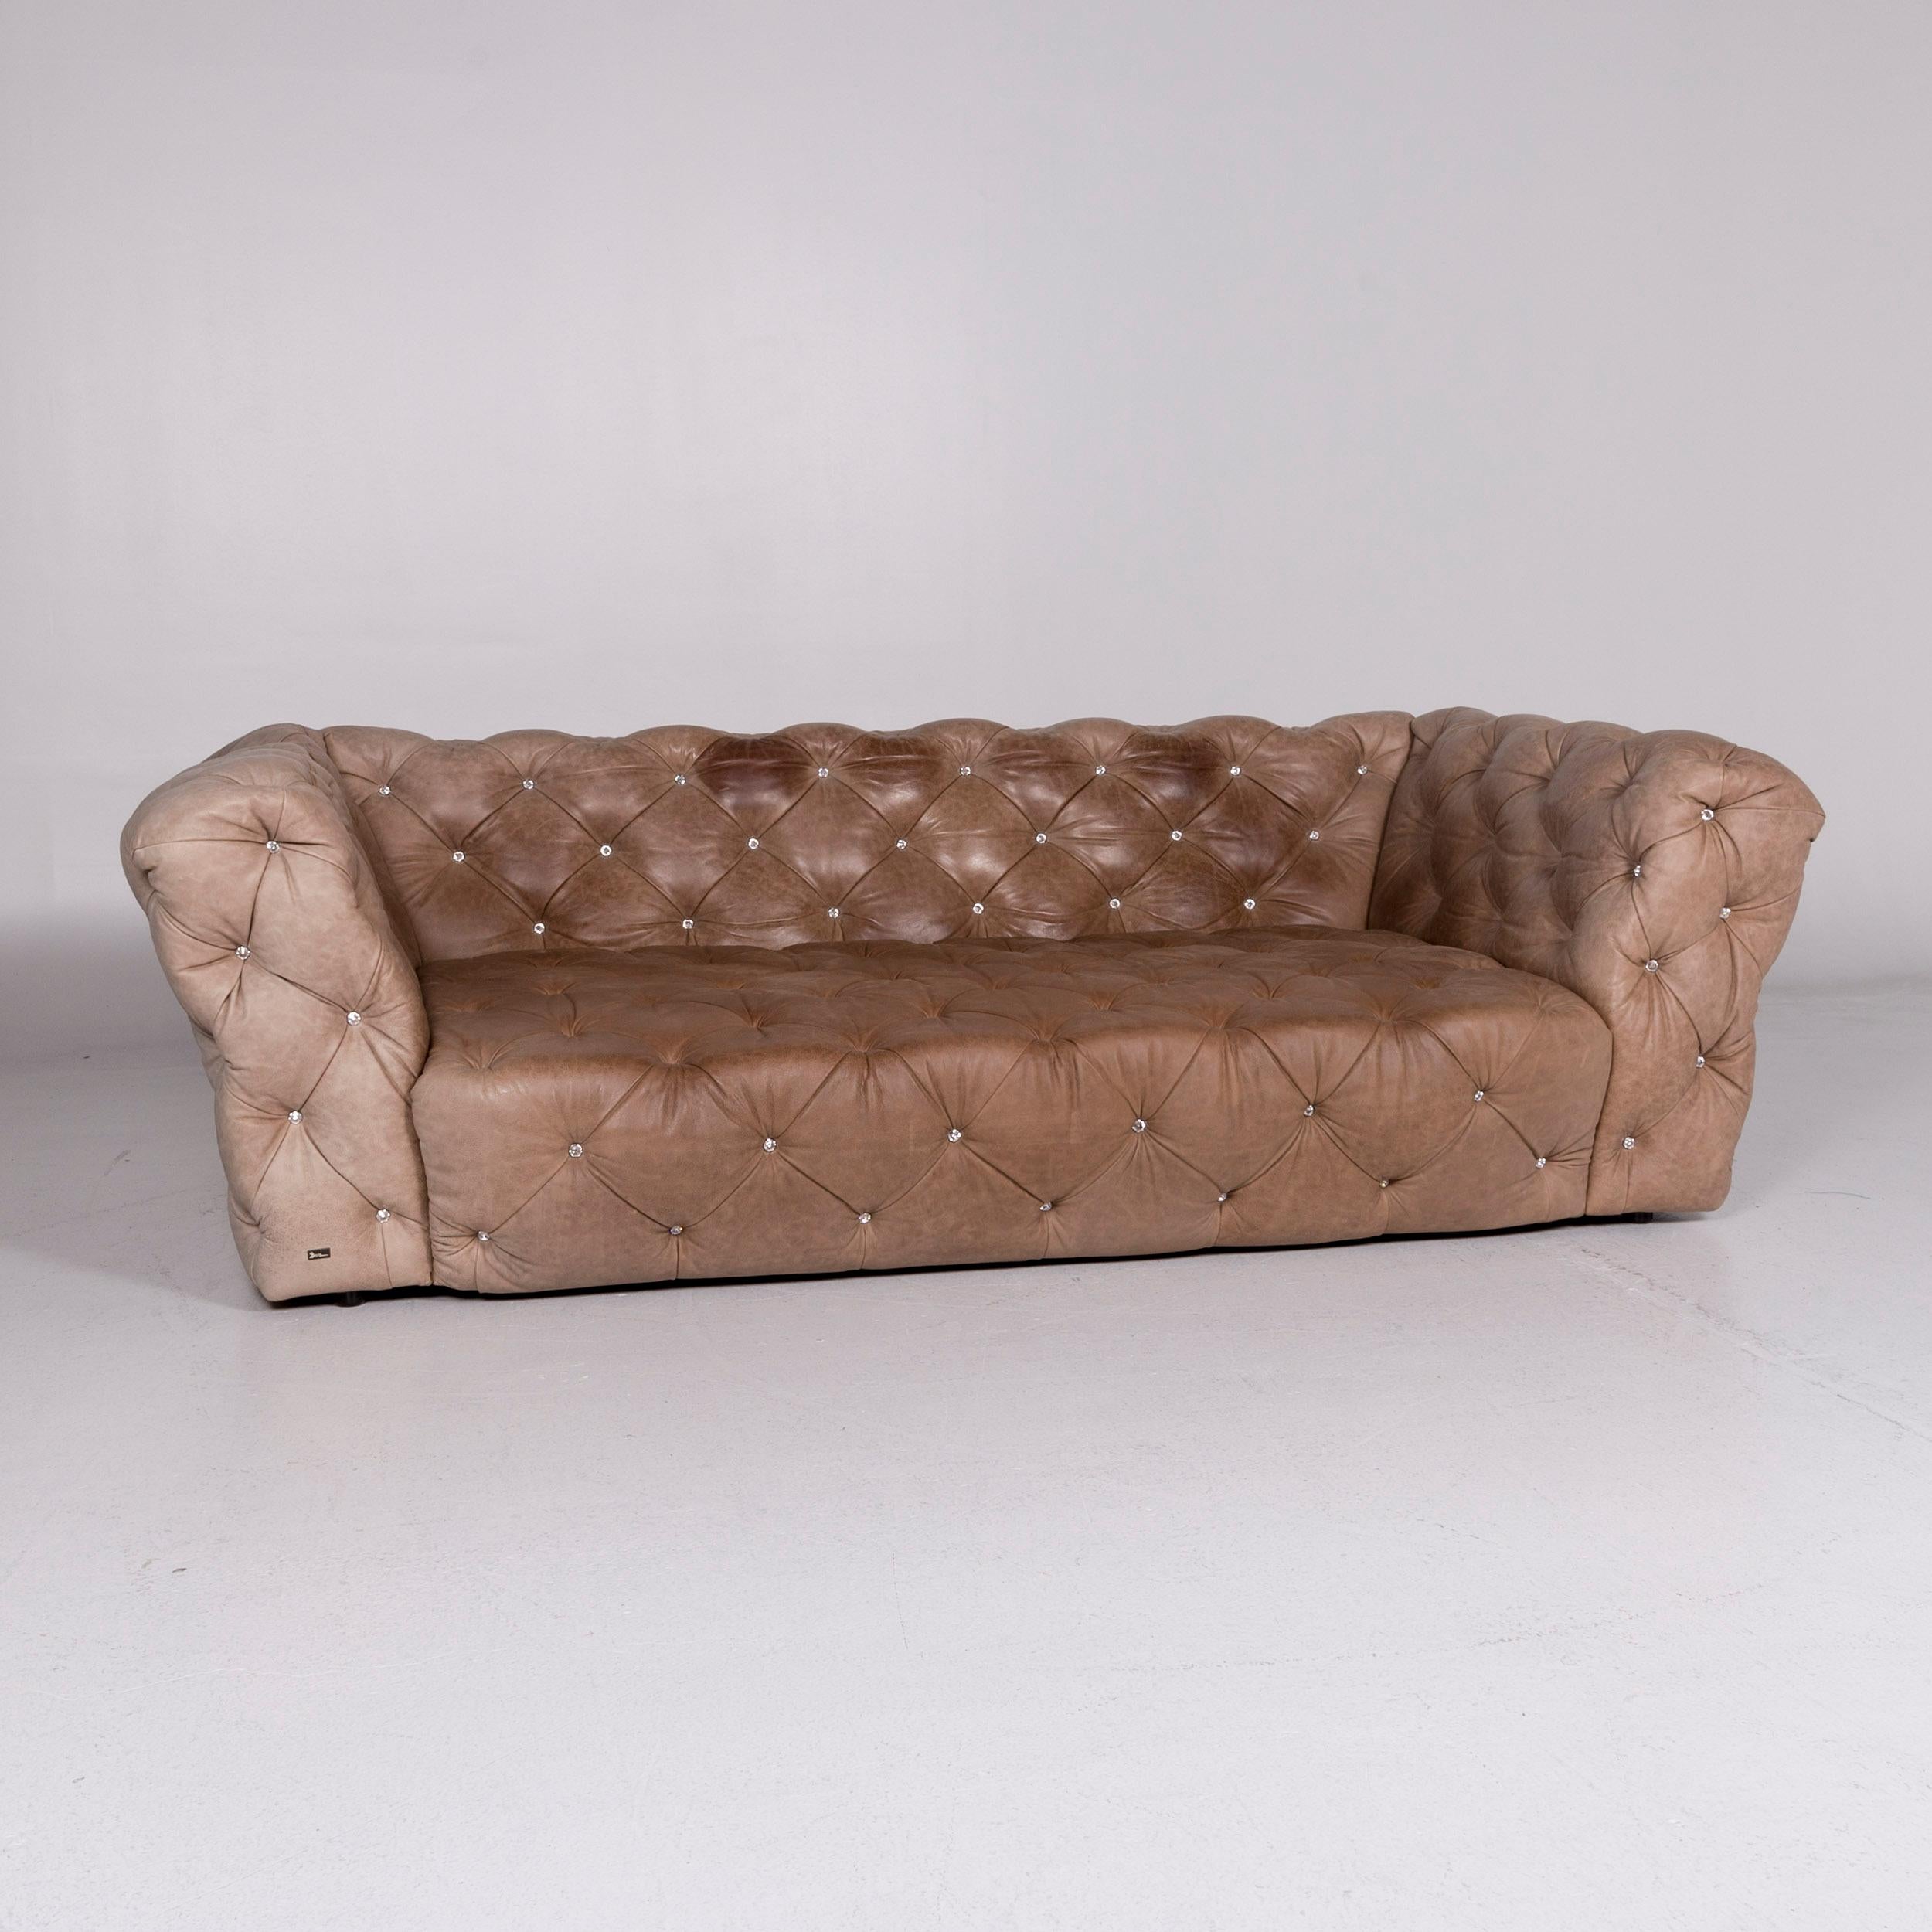 We bring to you a Bretz Marilyn leather sofa brown three-seat Kaptionierung Glitterstones.

 Product Measurements in centimeters:
 
Depth 149
Width 277
Height 84
Seat-height 42
Rest-height 83
Seat-depth 112
Seat-width 195
Back-height